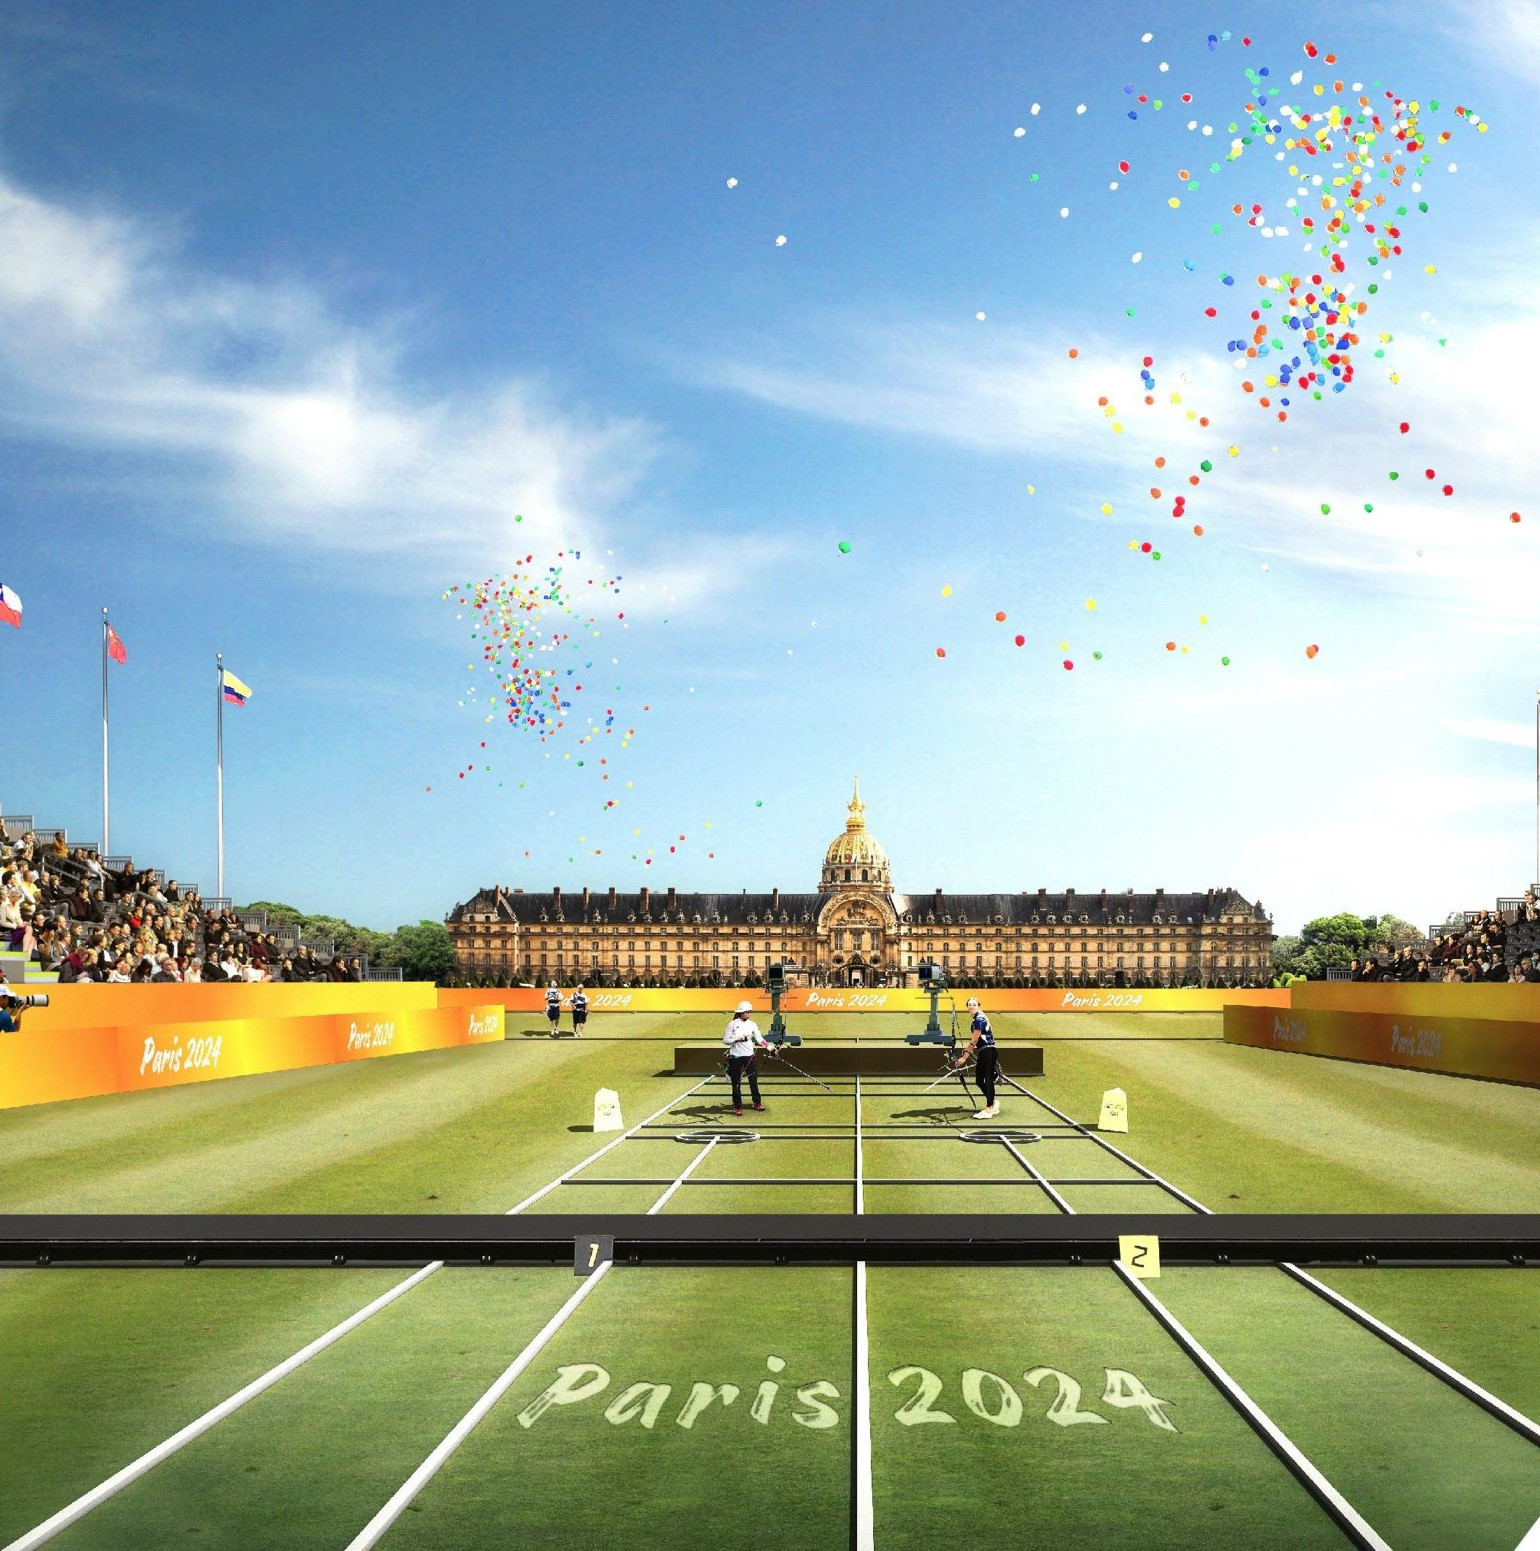 Finals of the Archery World Cup in Paris year will take place at the Esplanade des Invalides, the venue for next year's Olympic and Paralympic Games ©World Archery 